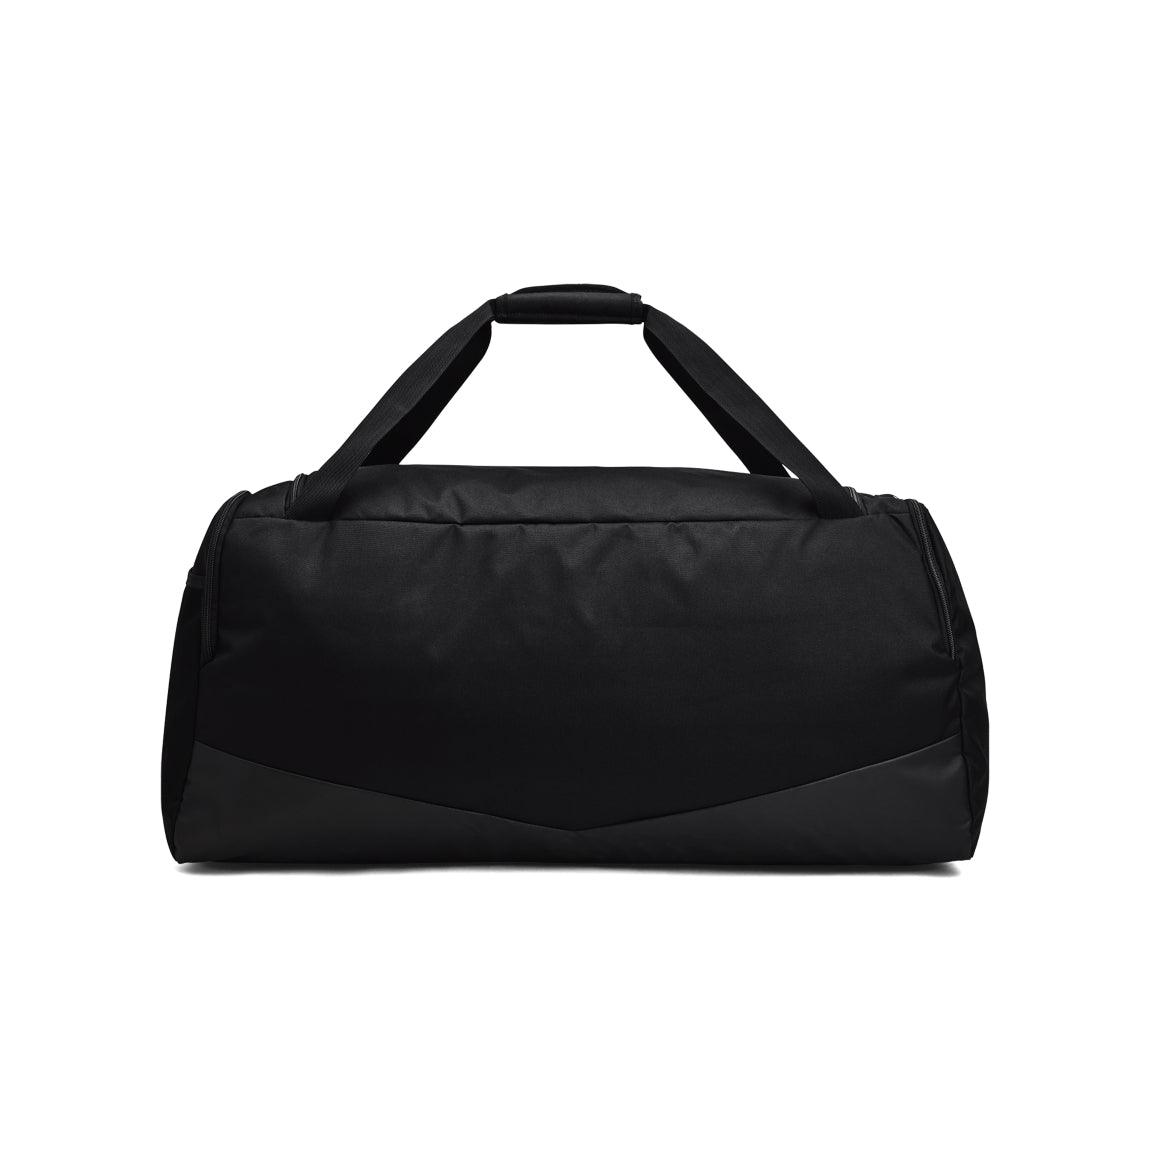 Under Armour Undeniable 5.0 LG Duffle Bag - Sports Excellence